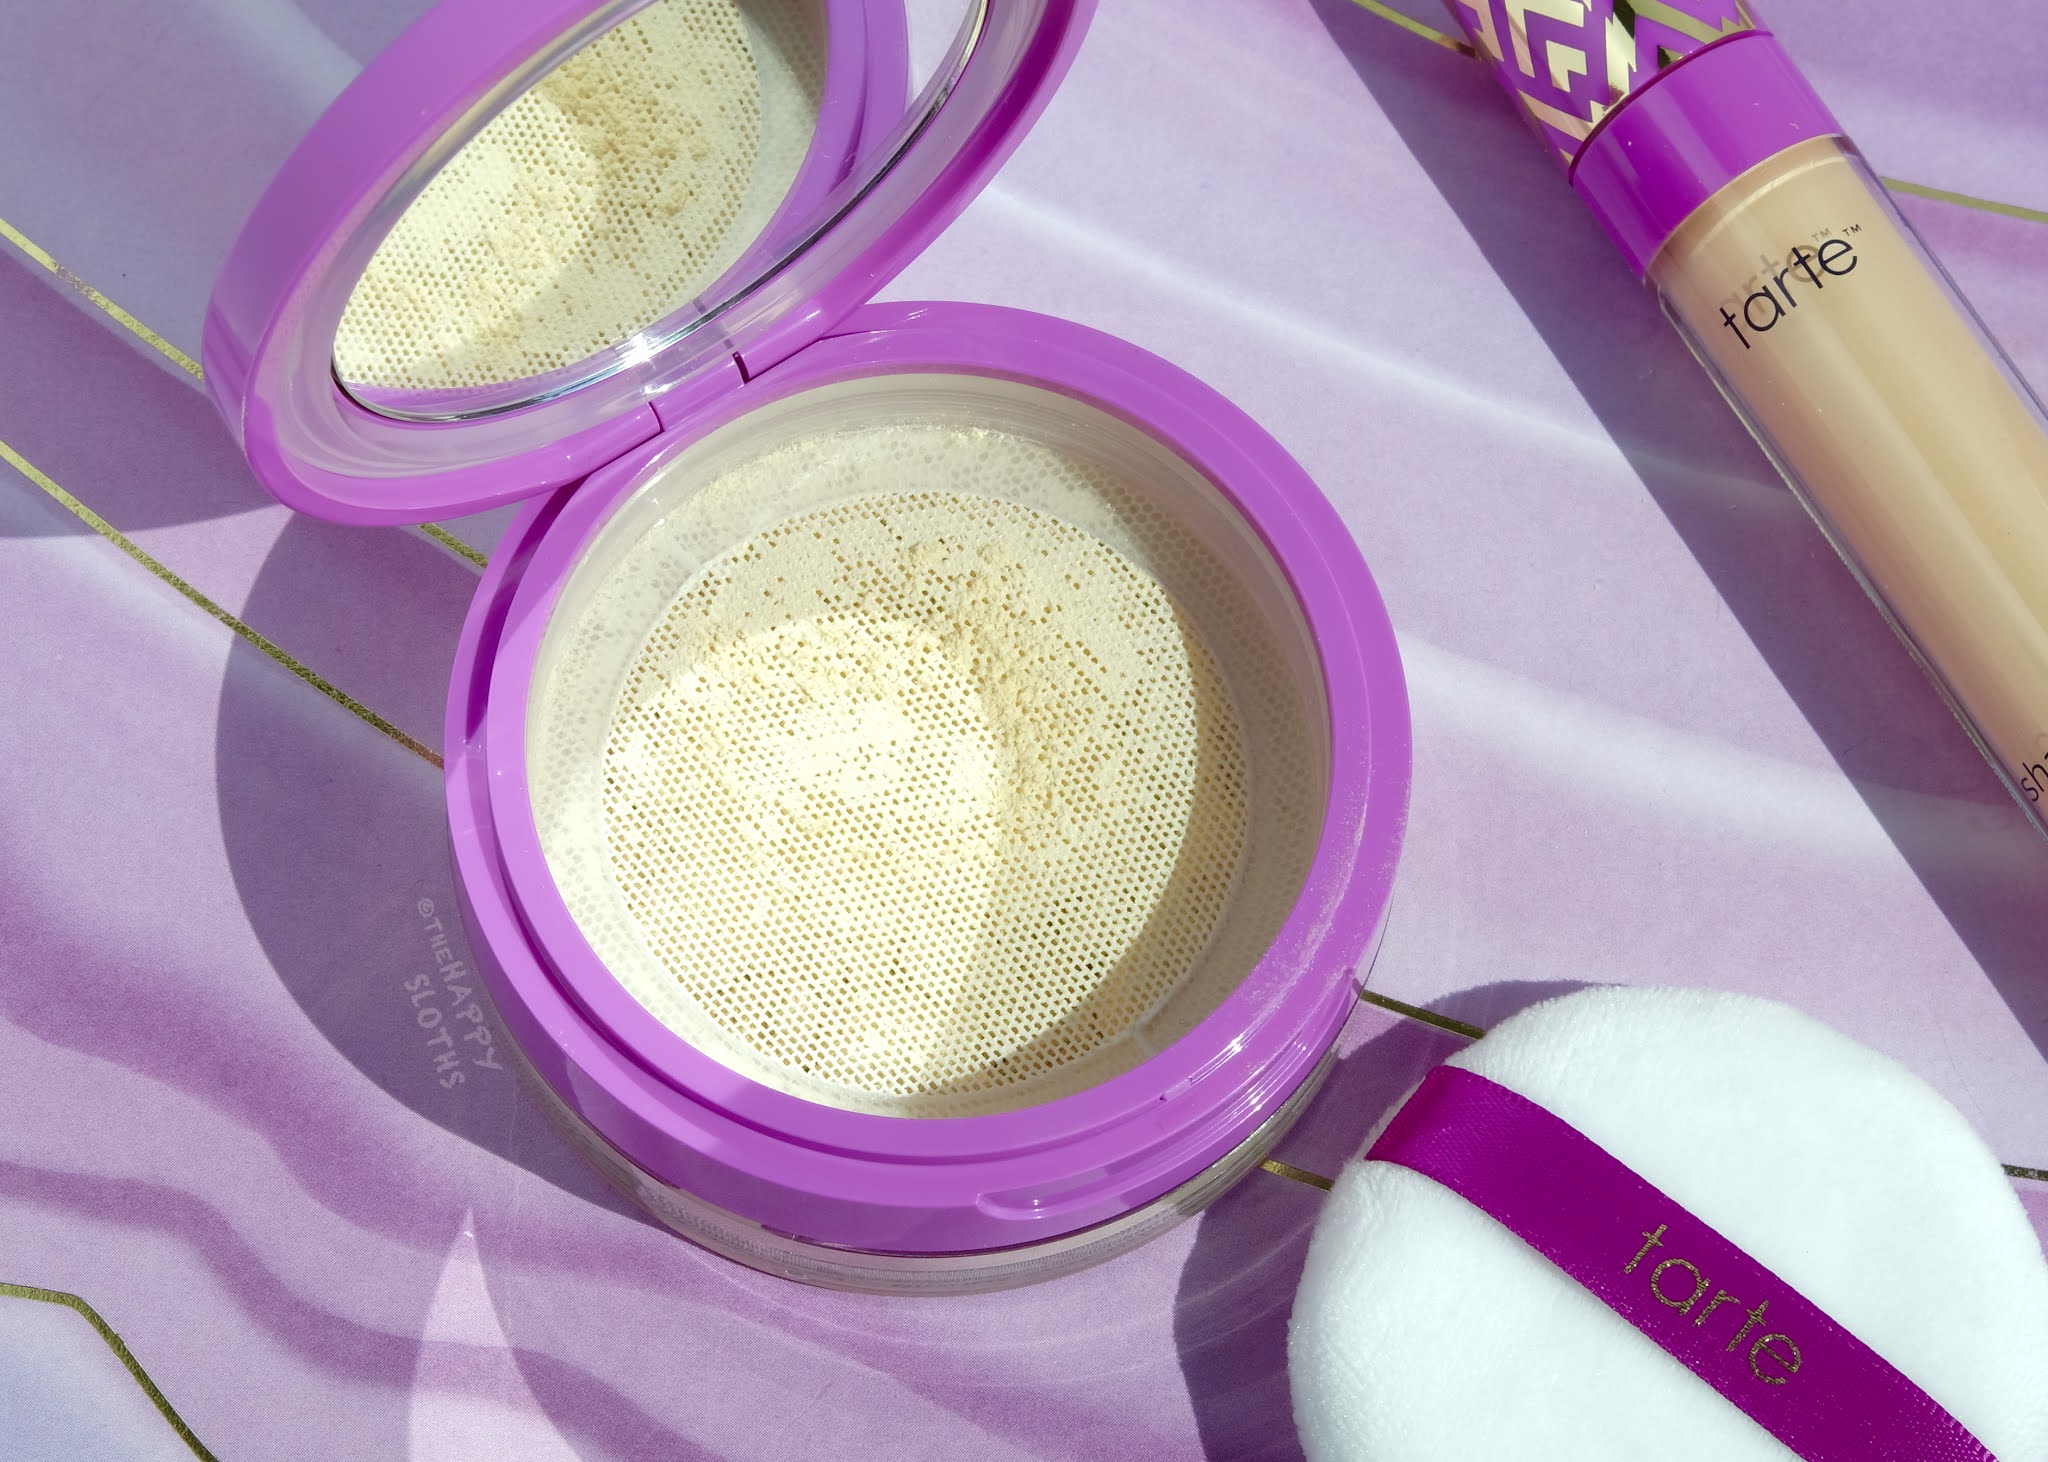 Tarte | Shape Tape Setting Powder in "Translucent": Review and Swatches